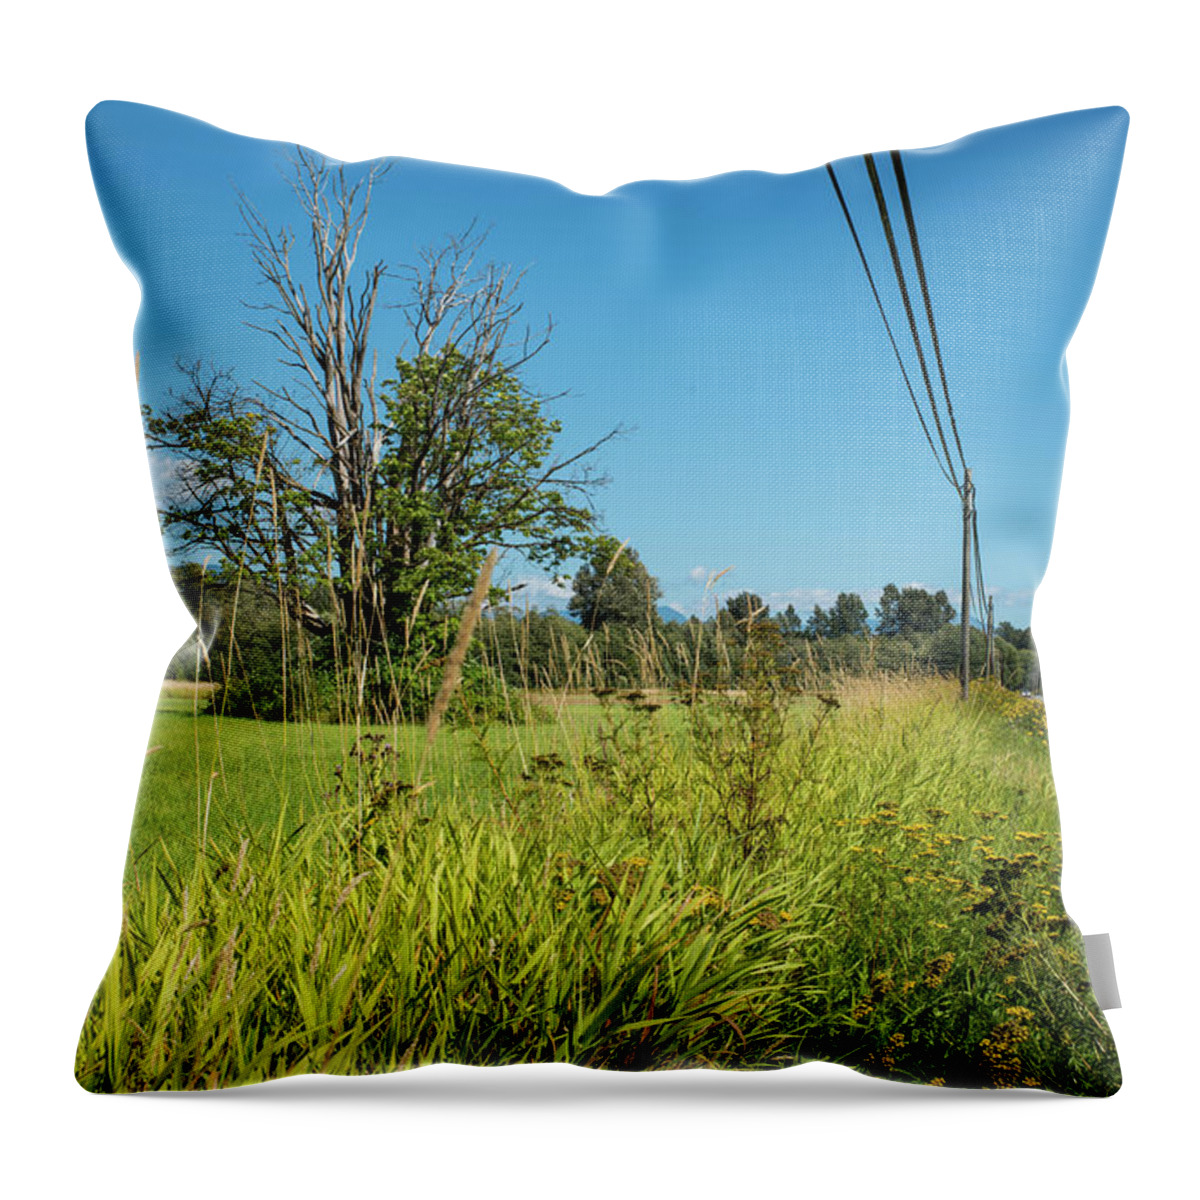 Roadside Wildflowers Throw Pillow featuring the photograph Roadside Wildflowers by Tom Cochran